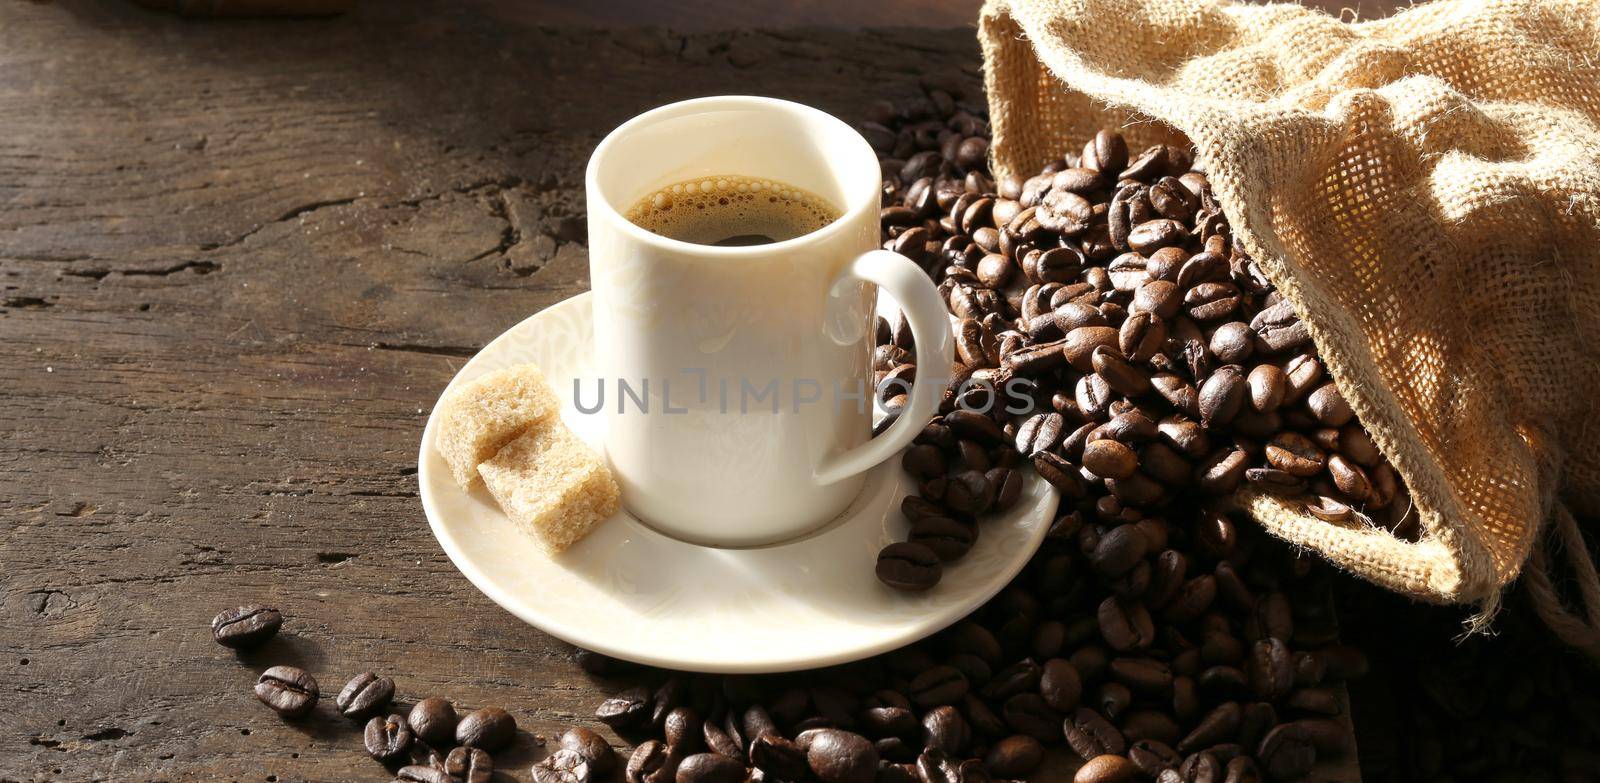 Hot cup of coffee espresso, coffee beans, canvas on old wooden table. Morning sun light. Copyspace for text